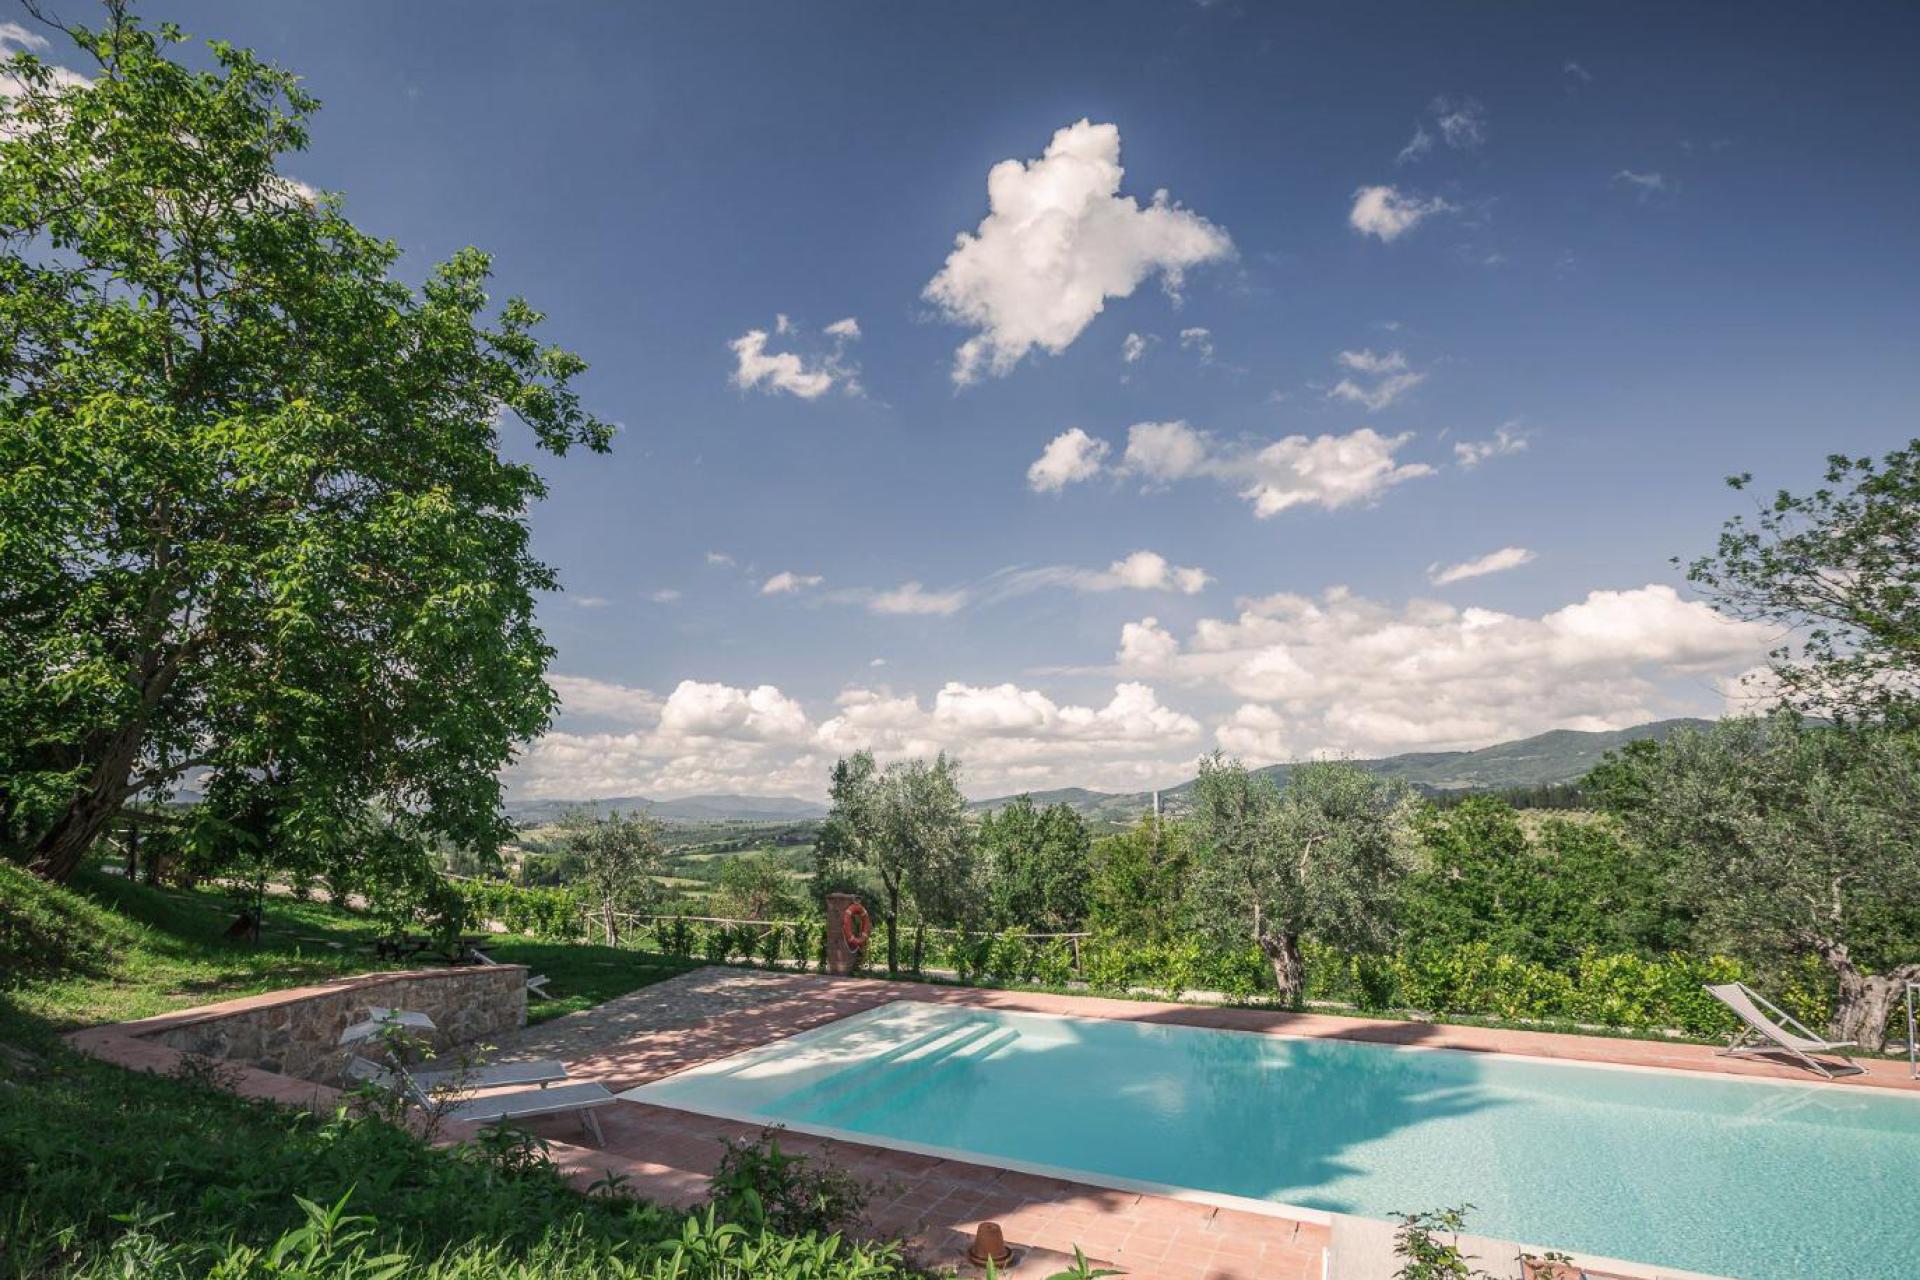 Cozy agriturismo in the Chianti region near Florence